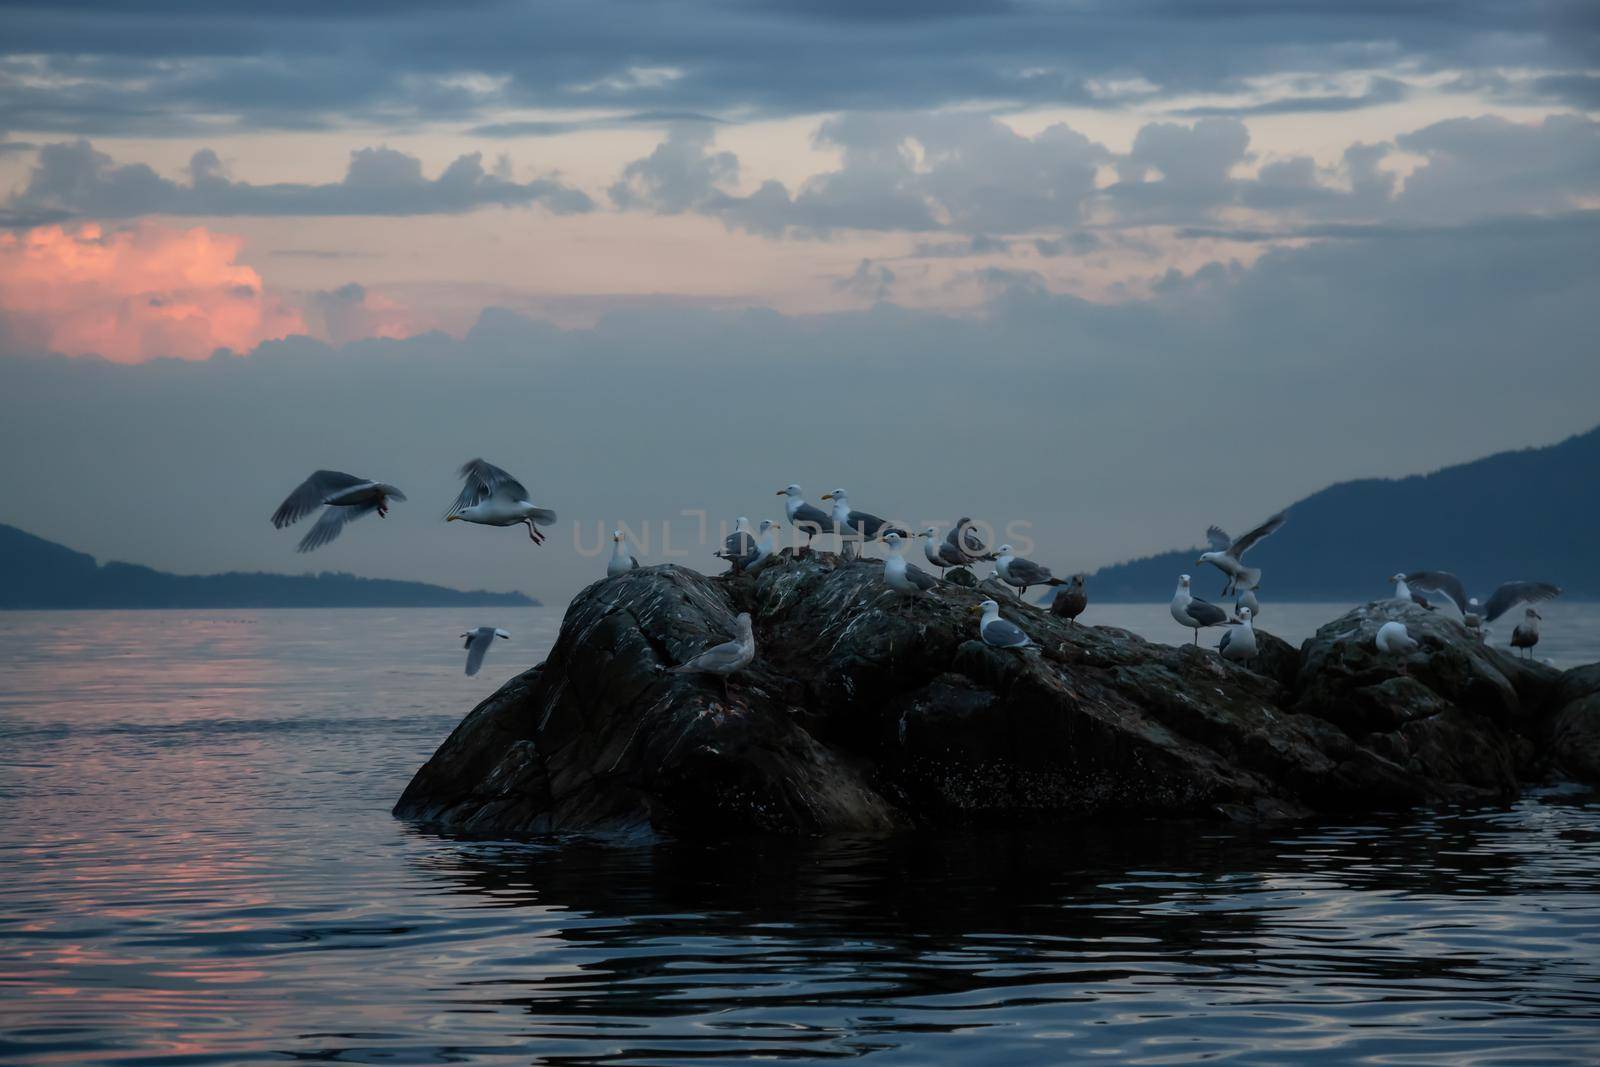 Flock of seagull on a rocky island during a vibrant sunset. Taken in Howe Sound, North of Vancouver, British Columbia, Canada.